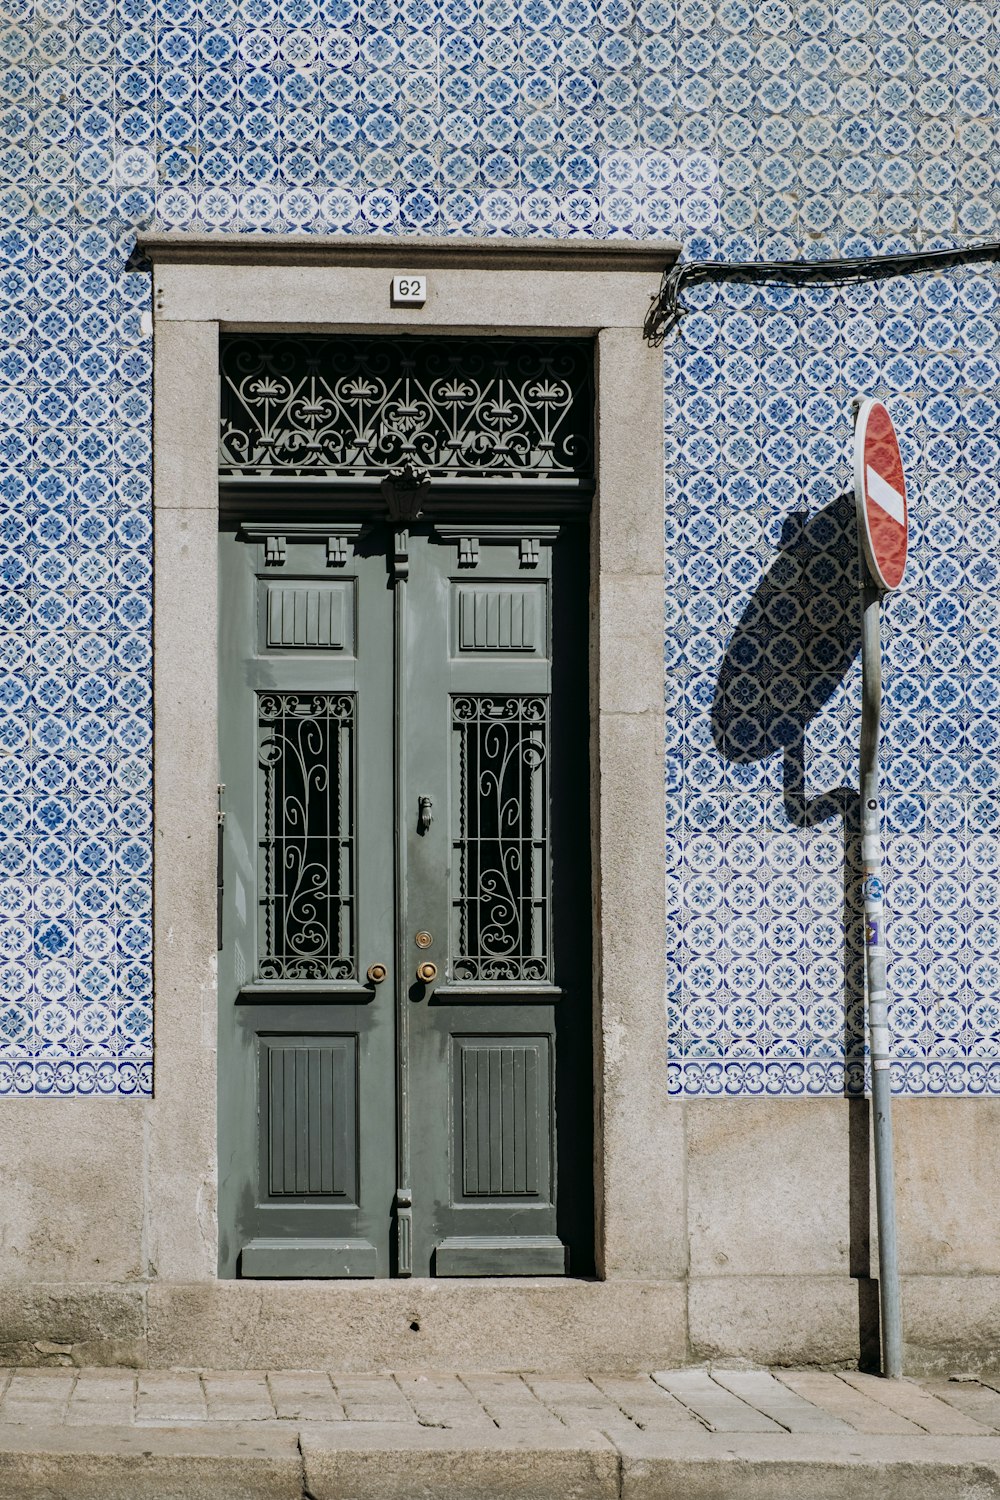 a blue and white building with two doors and a street sign